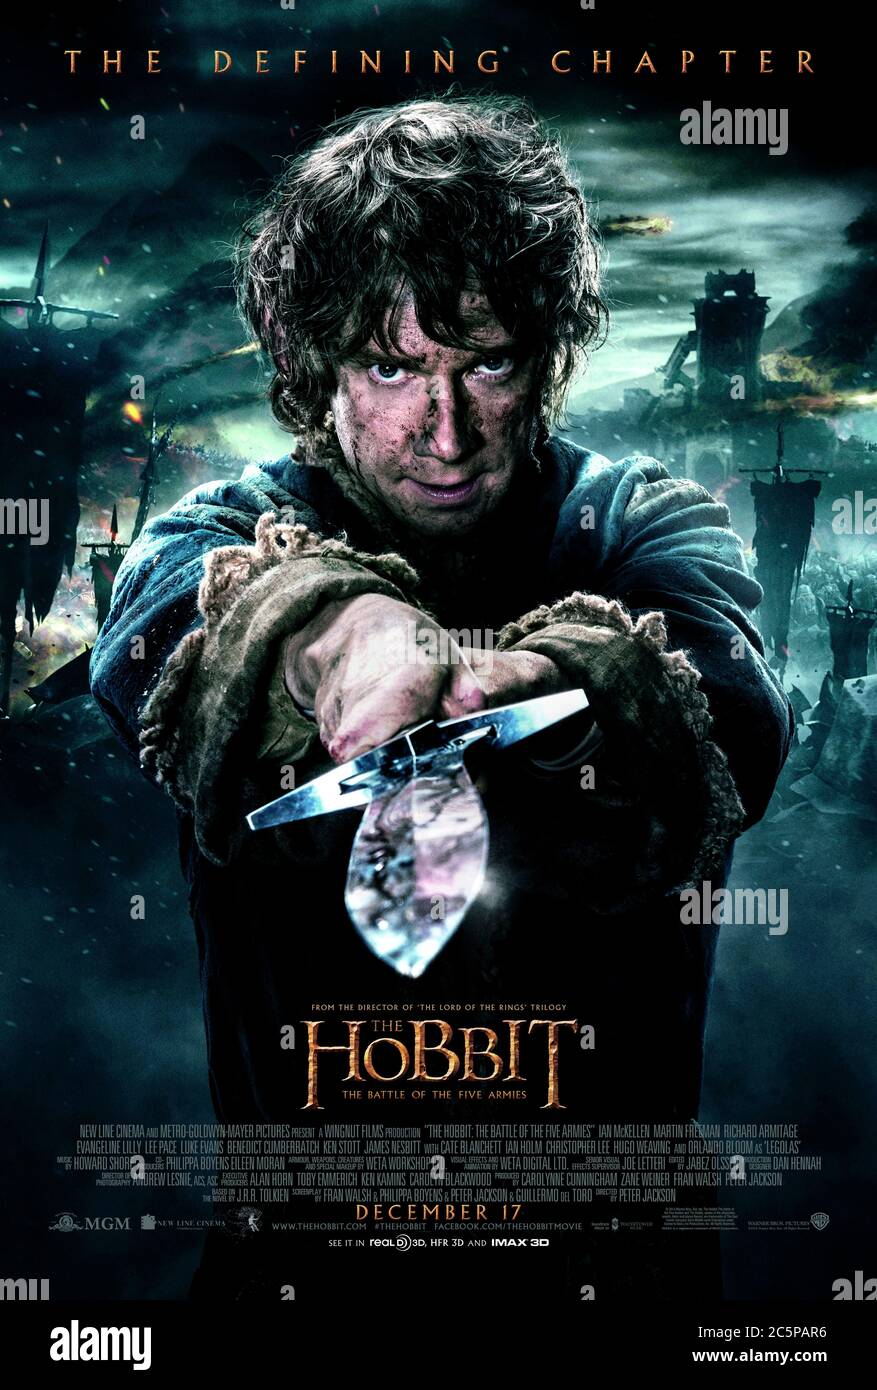 The Hobbit: The Battle of the Five Armies (2014) directed by Peter Jackson and starring Ian McKellen, Martin Freeman, Richard Armitage and James Nesbitt. Final part of the trilogy based on J. R. R. Tolkien's book The Hobbit, Bilbo Baggins fight to keep the Lonely Mountain from falling into the hands of the mysterious Necromancer. Stock Photo